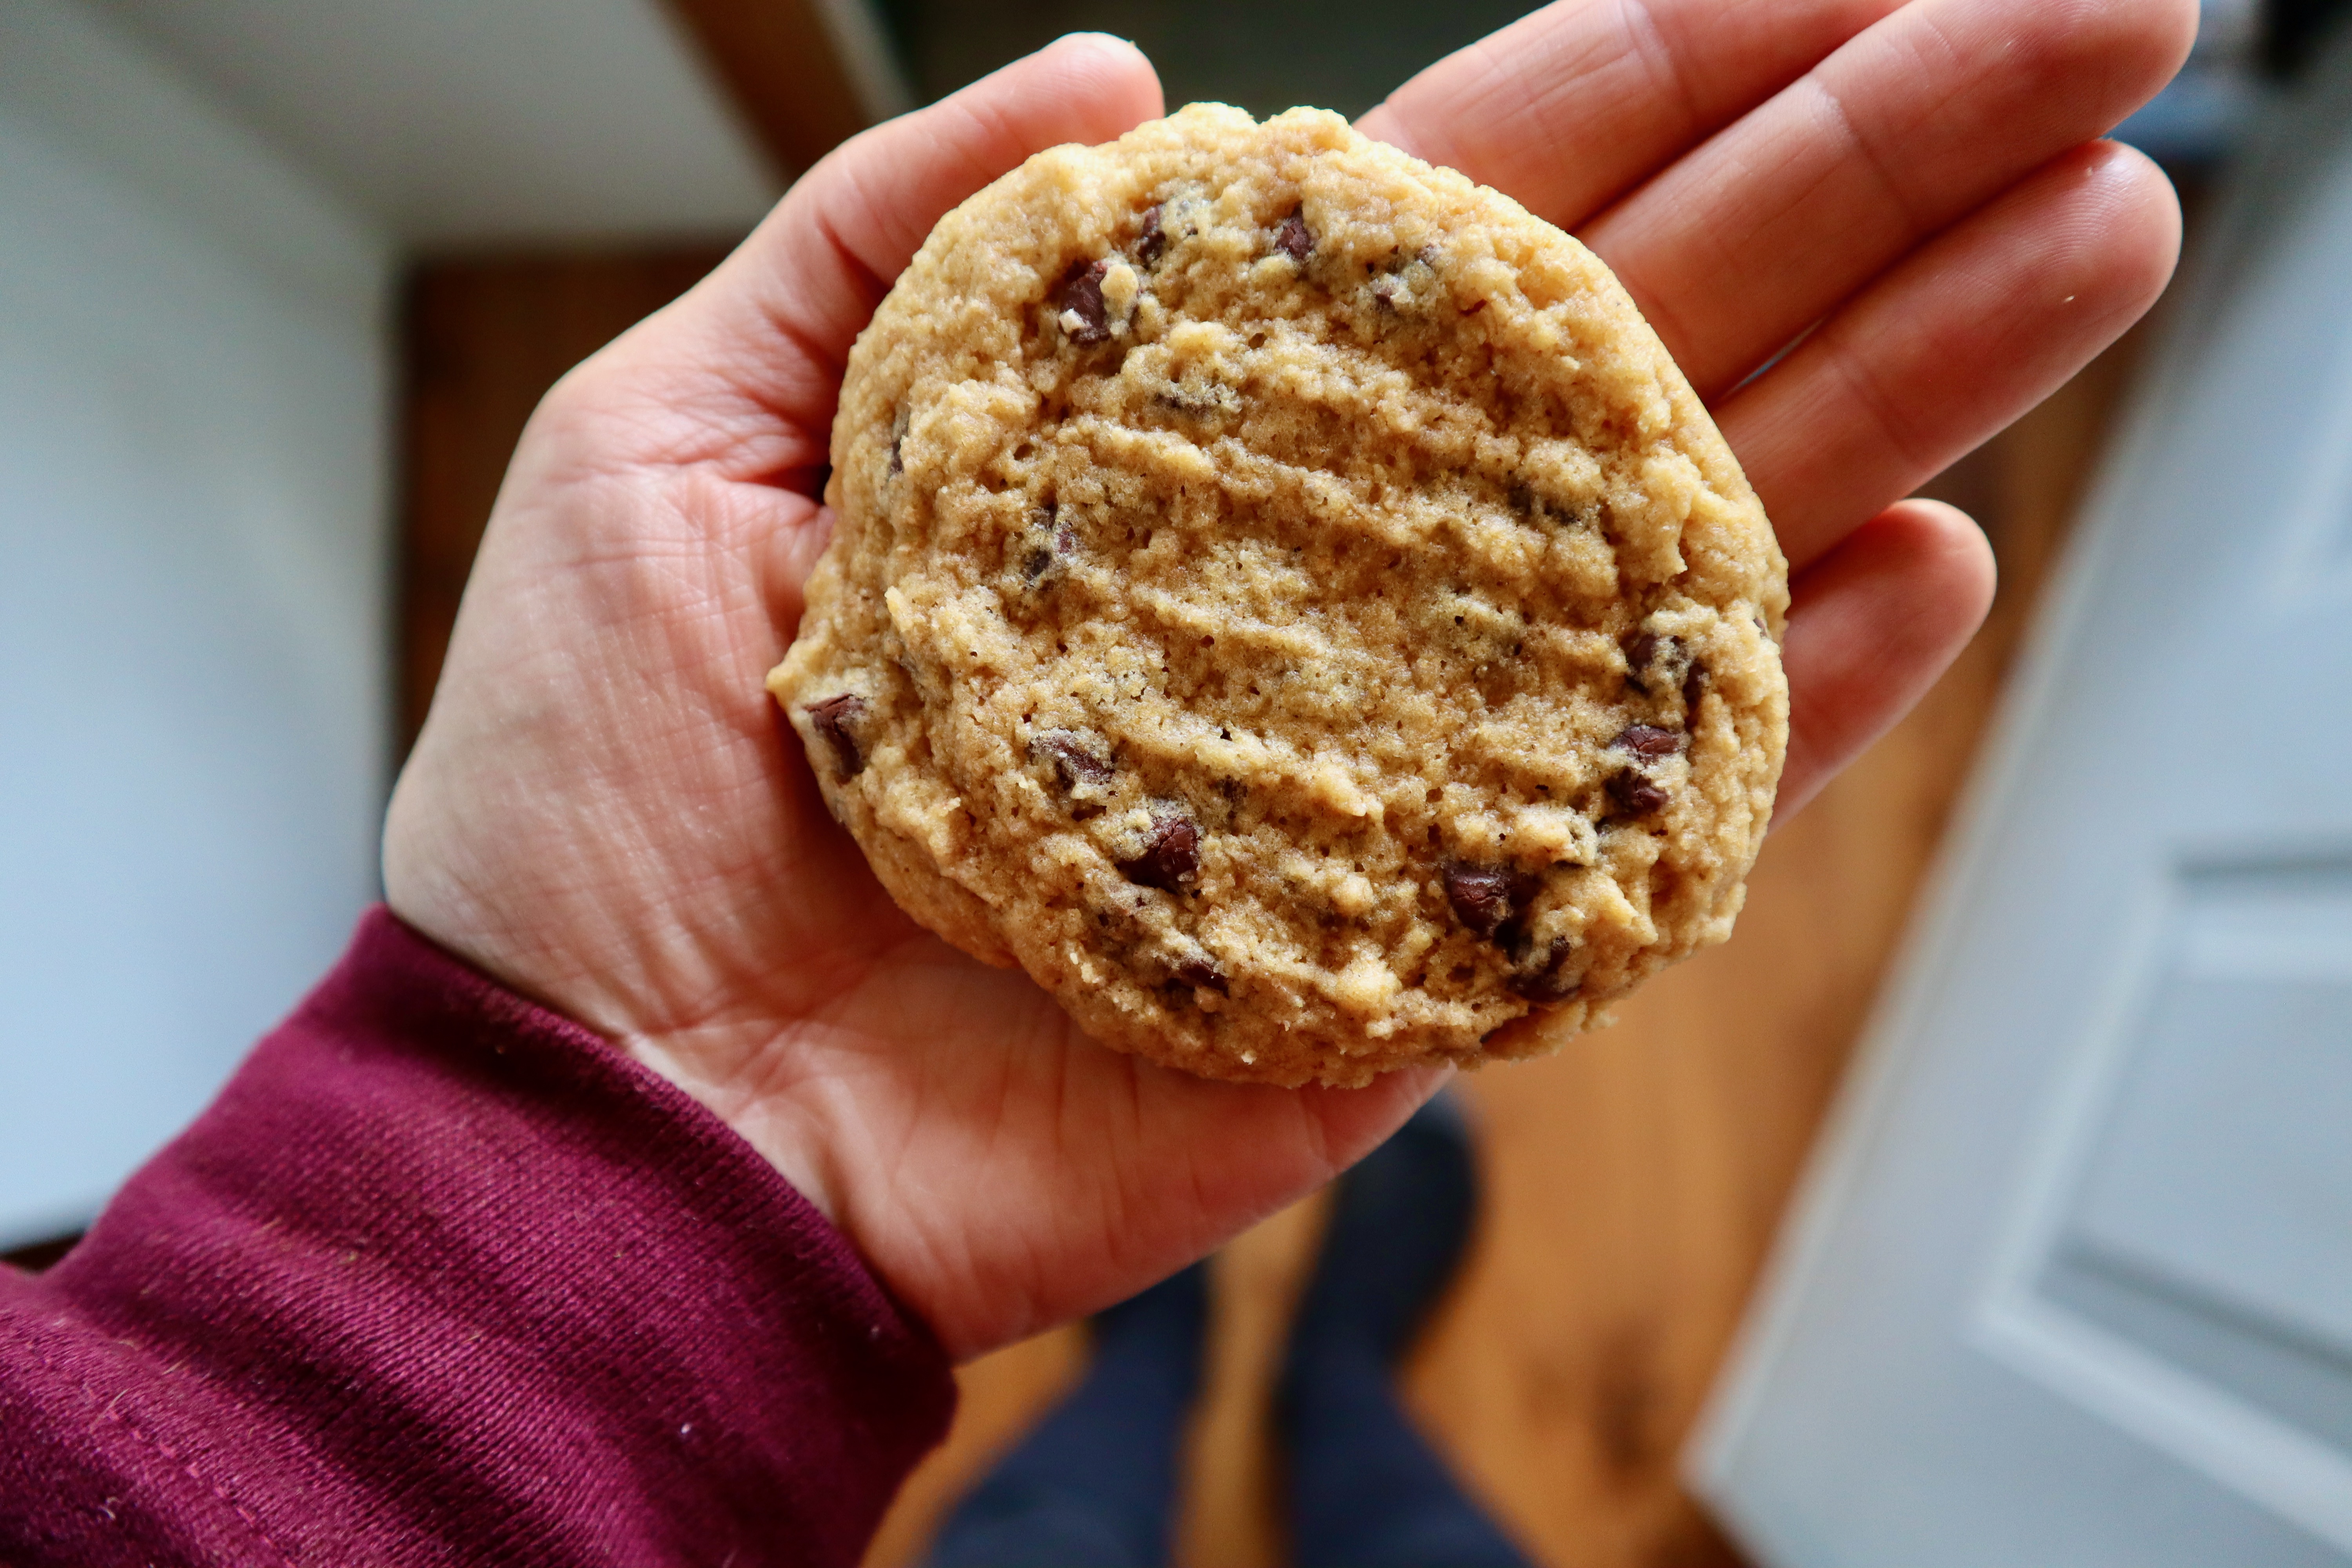 Large chocolate chip cookie in the palm of a woman's hand.